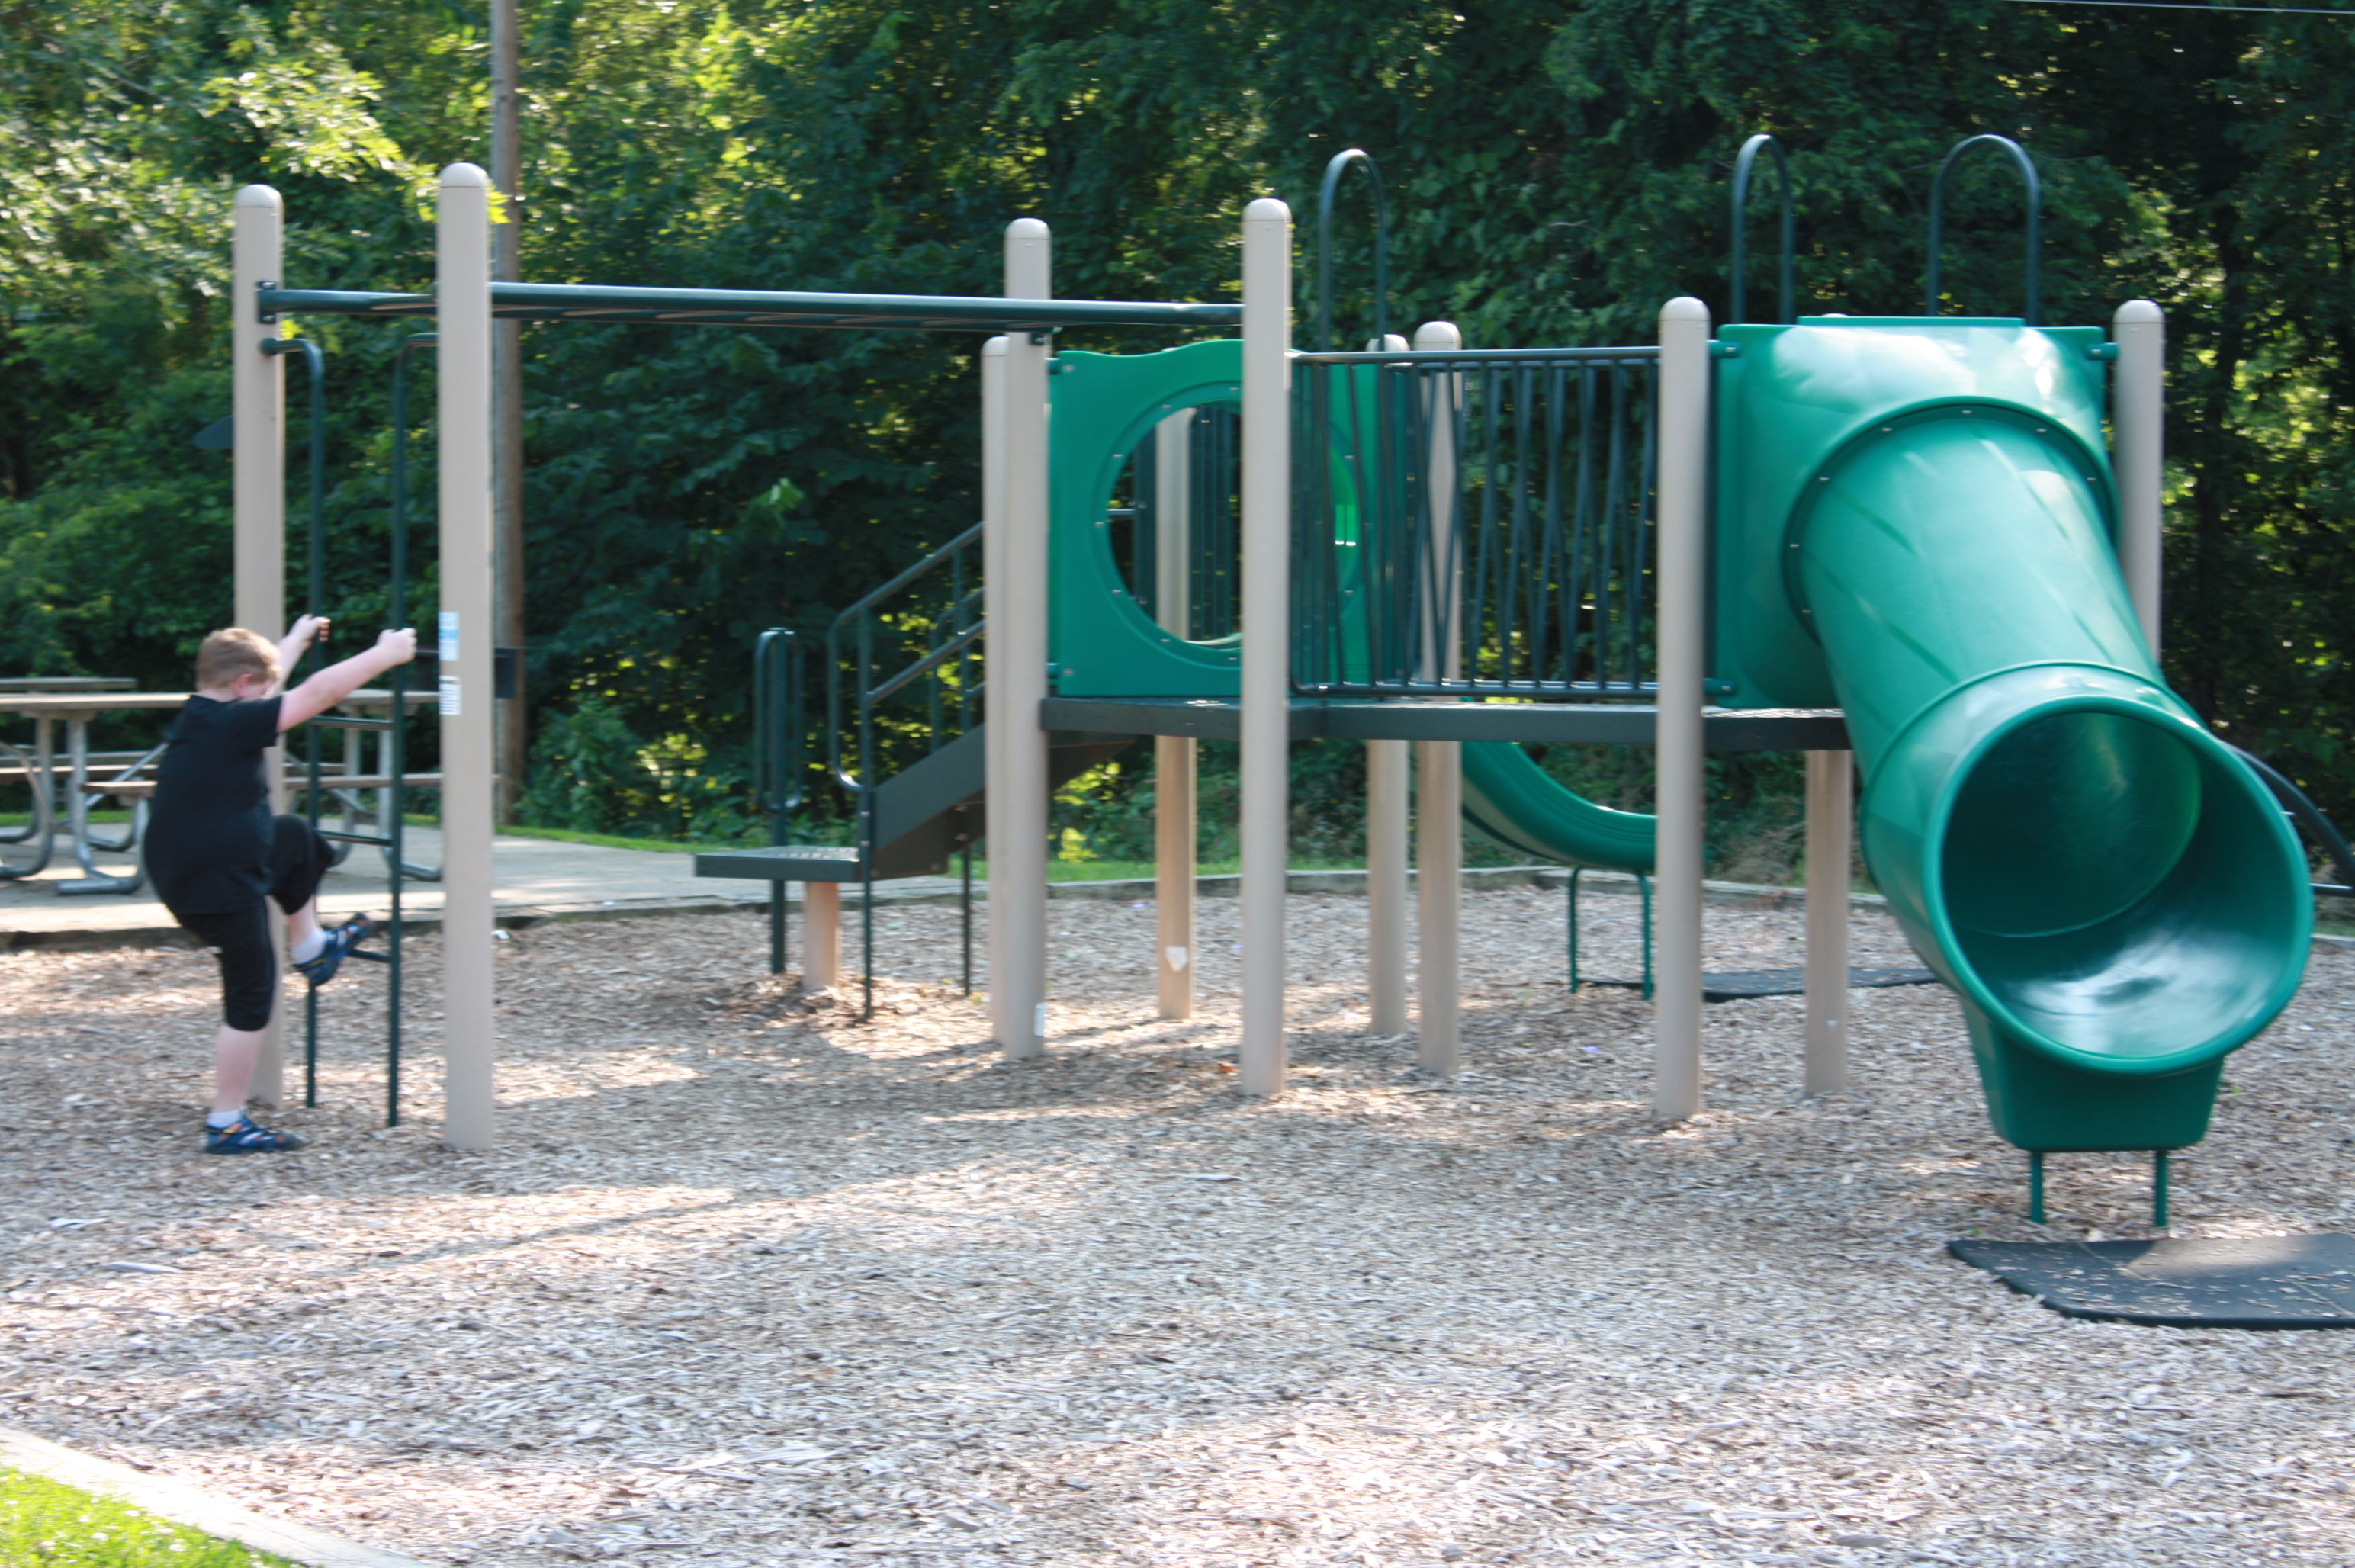 a kid climbing on the ladder of the playground structure, which includes monkey bars and a couple of slides